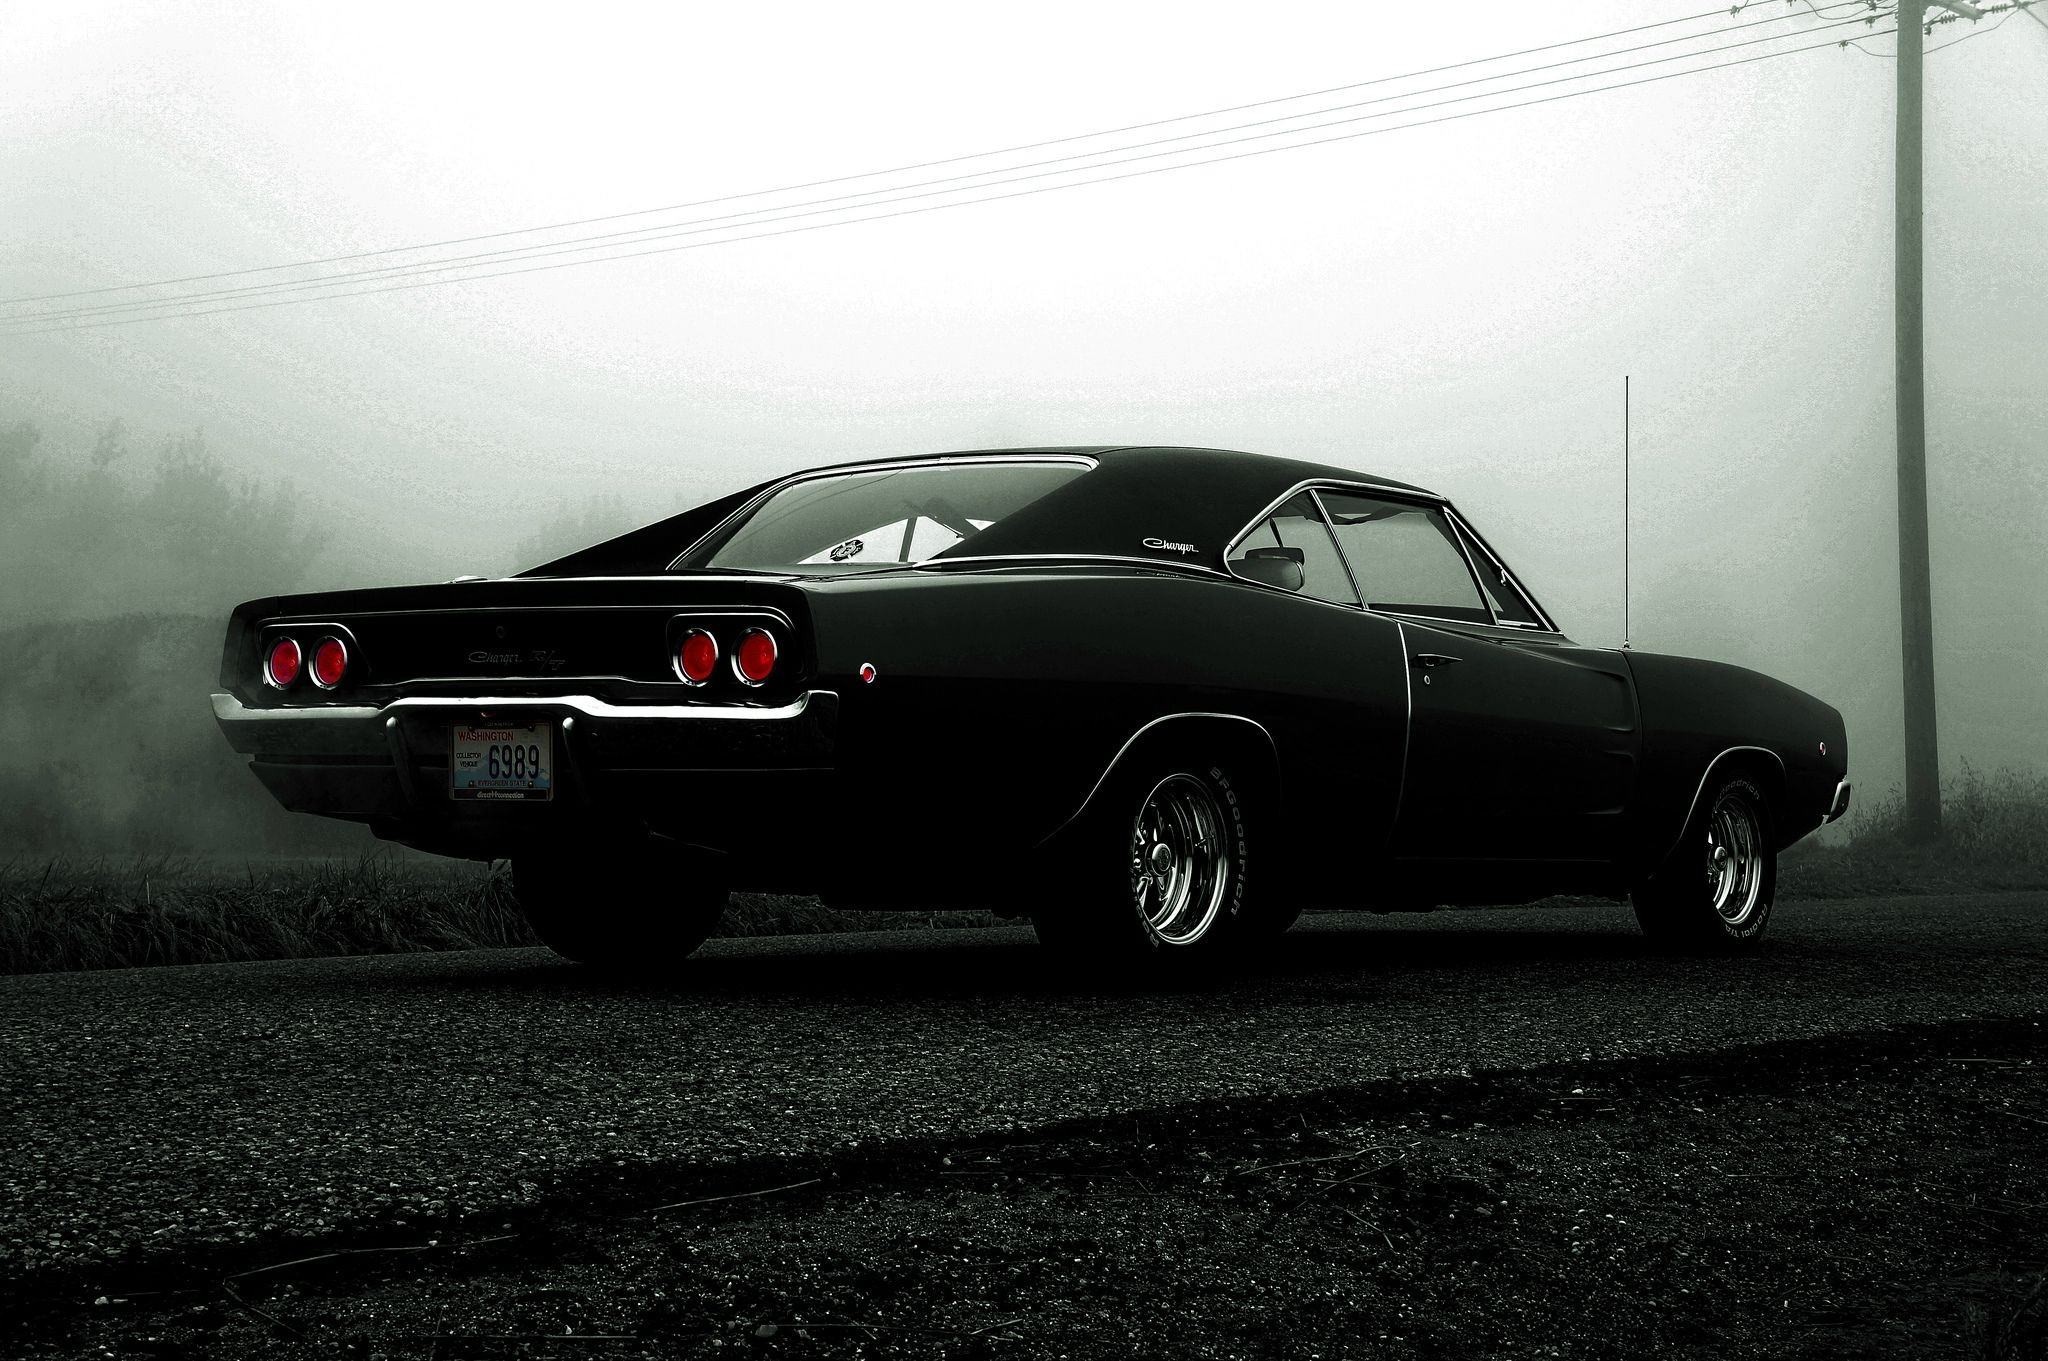 Powerful black Dodge Charger